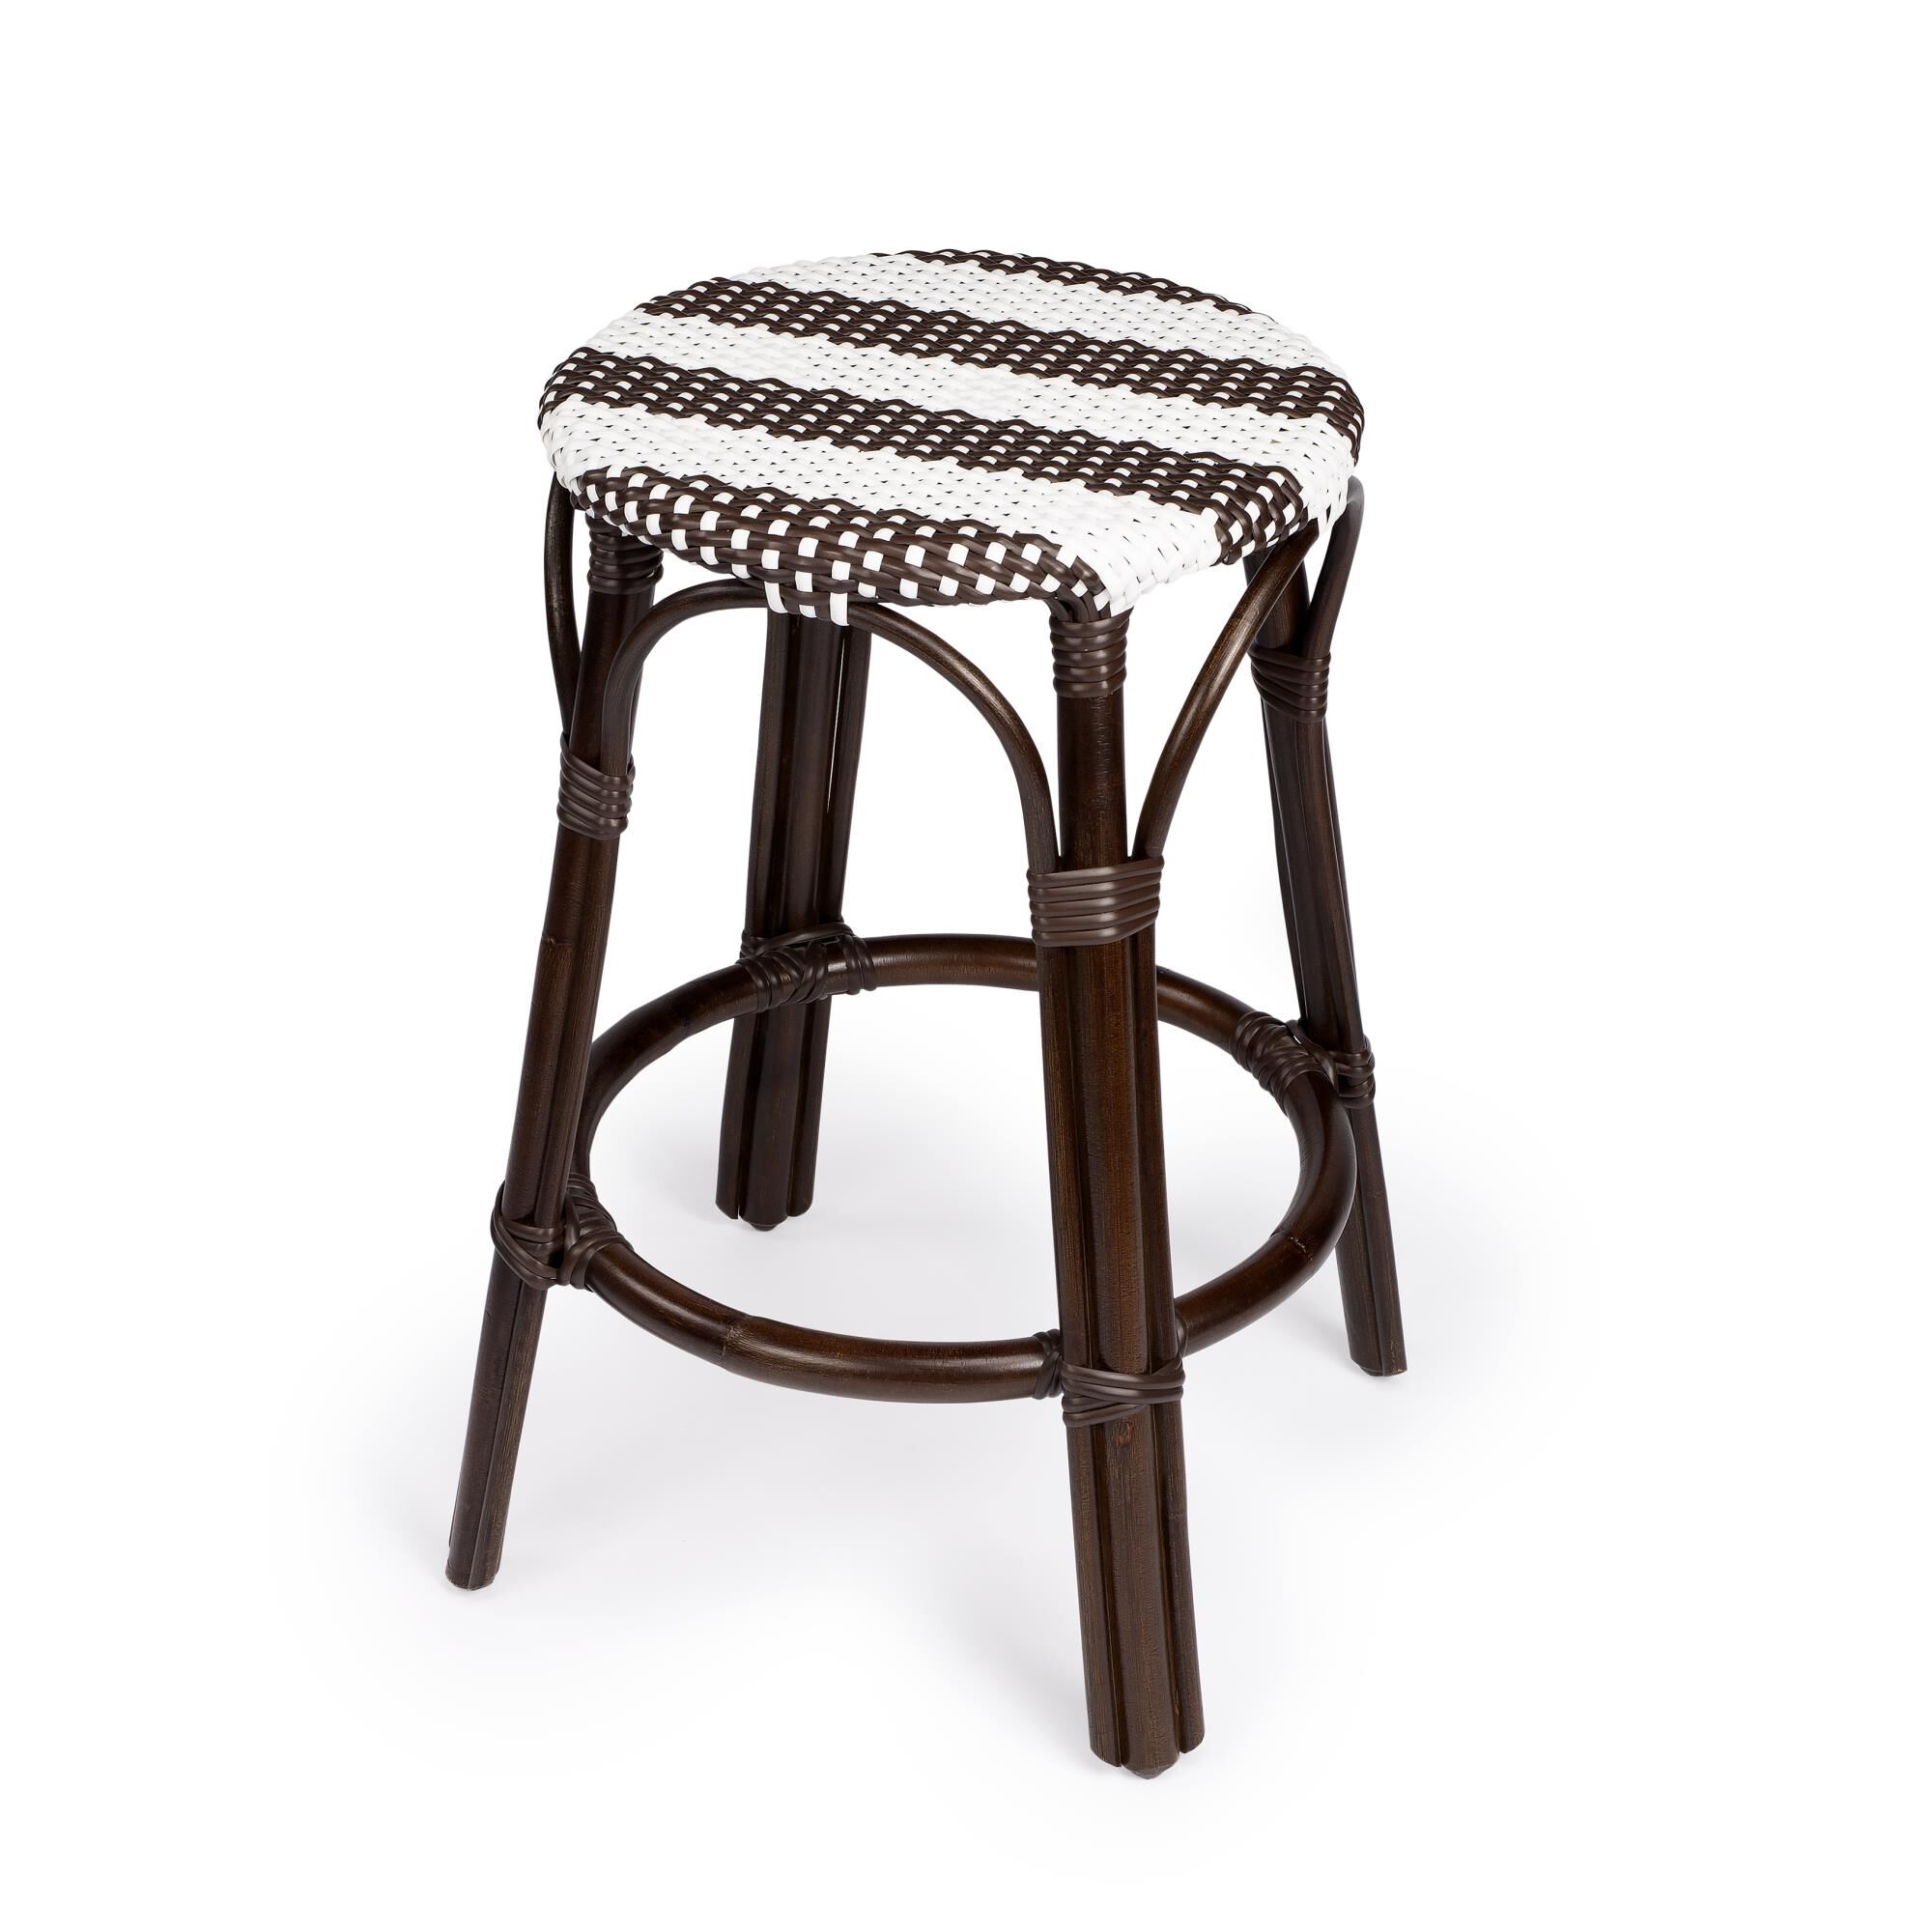 Photos - Chair Butler Specialty Company Tobias Stool Tobias - 9371403 - Transitional 9371